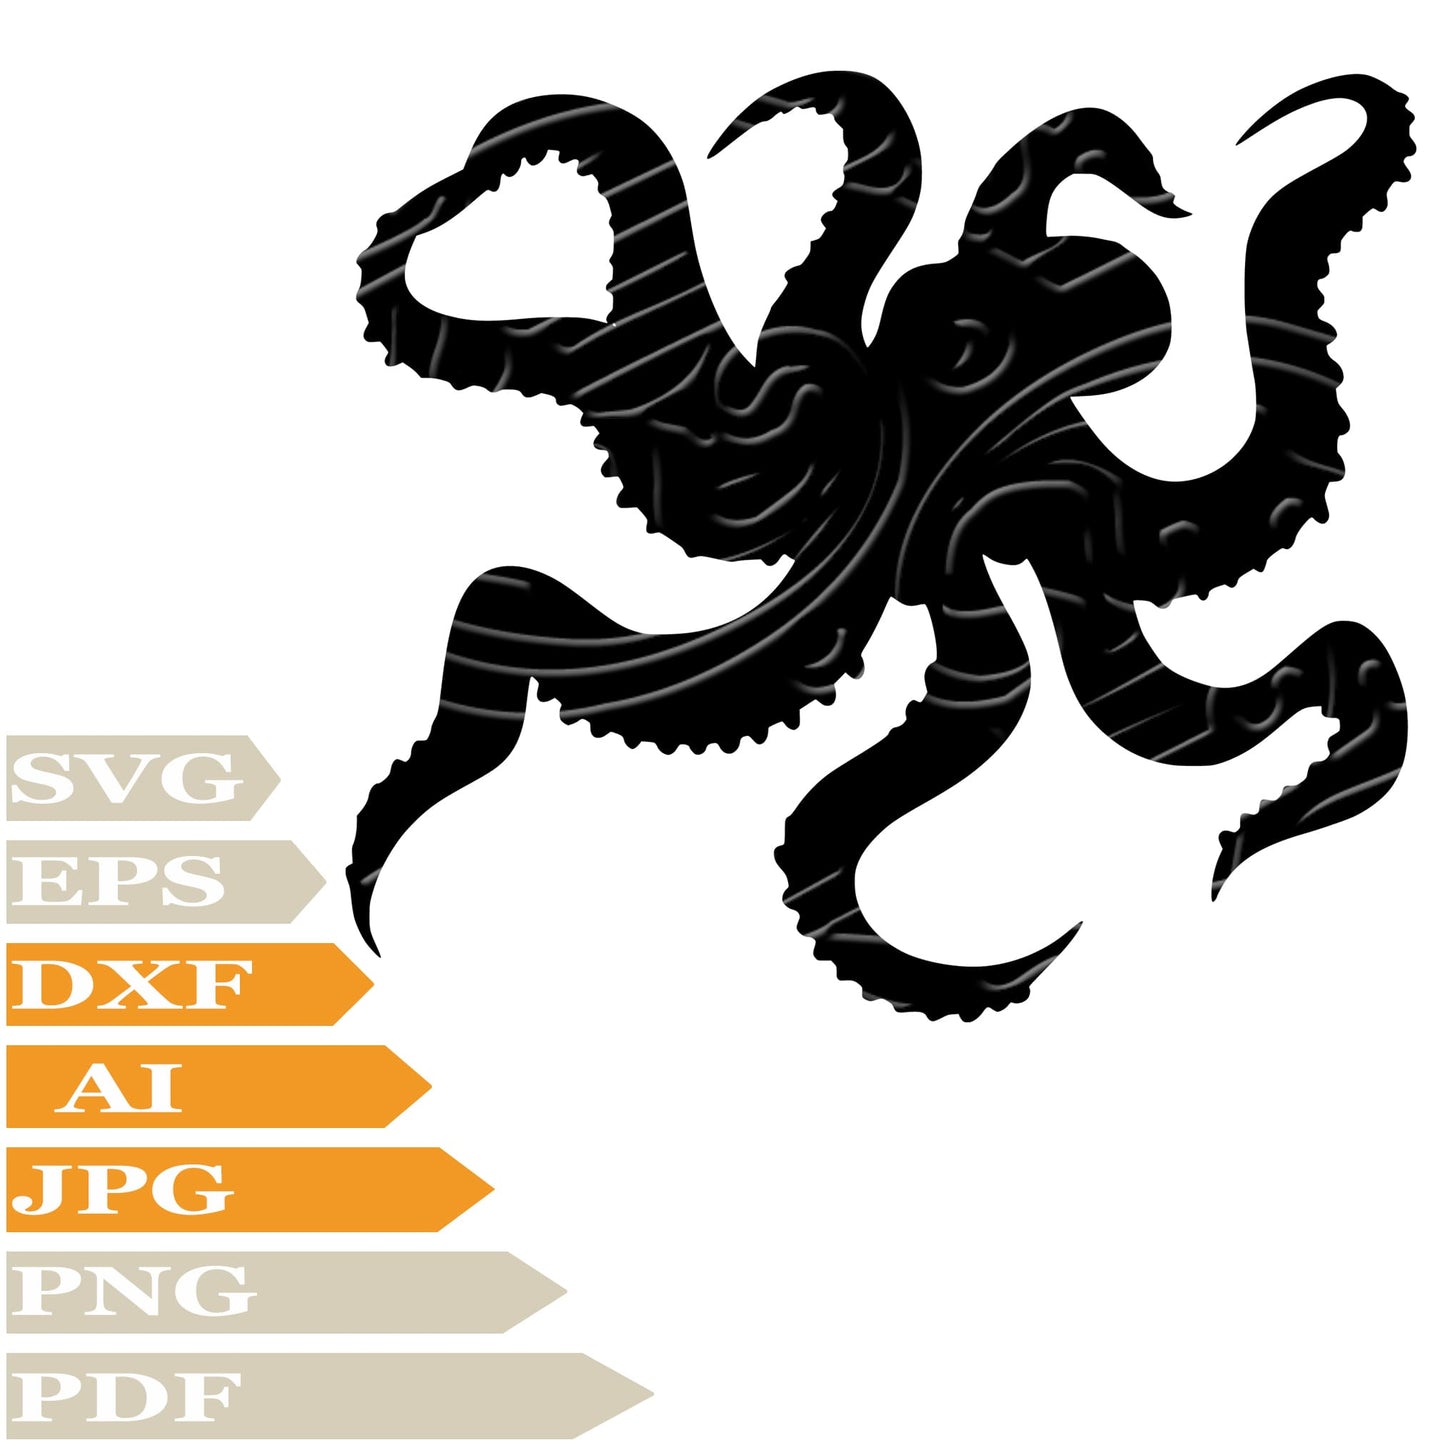 Octopus Svg File, Image Cut, Png, For Tattoo, Silhouette, Digital Vector Download, Cut File, Clipart, For Cricut